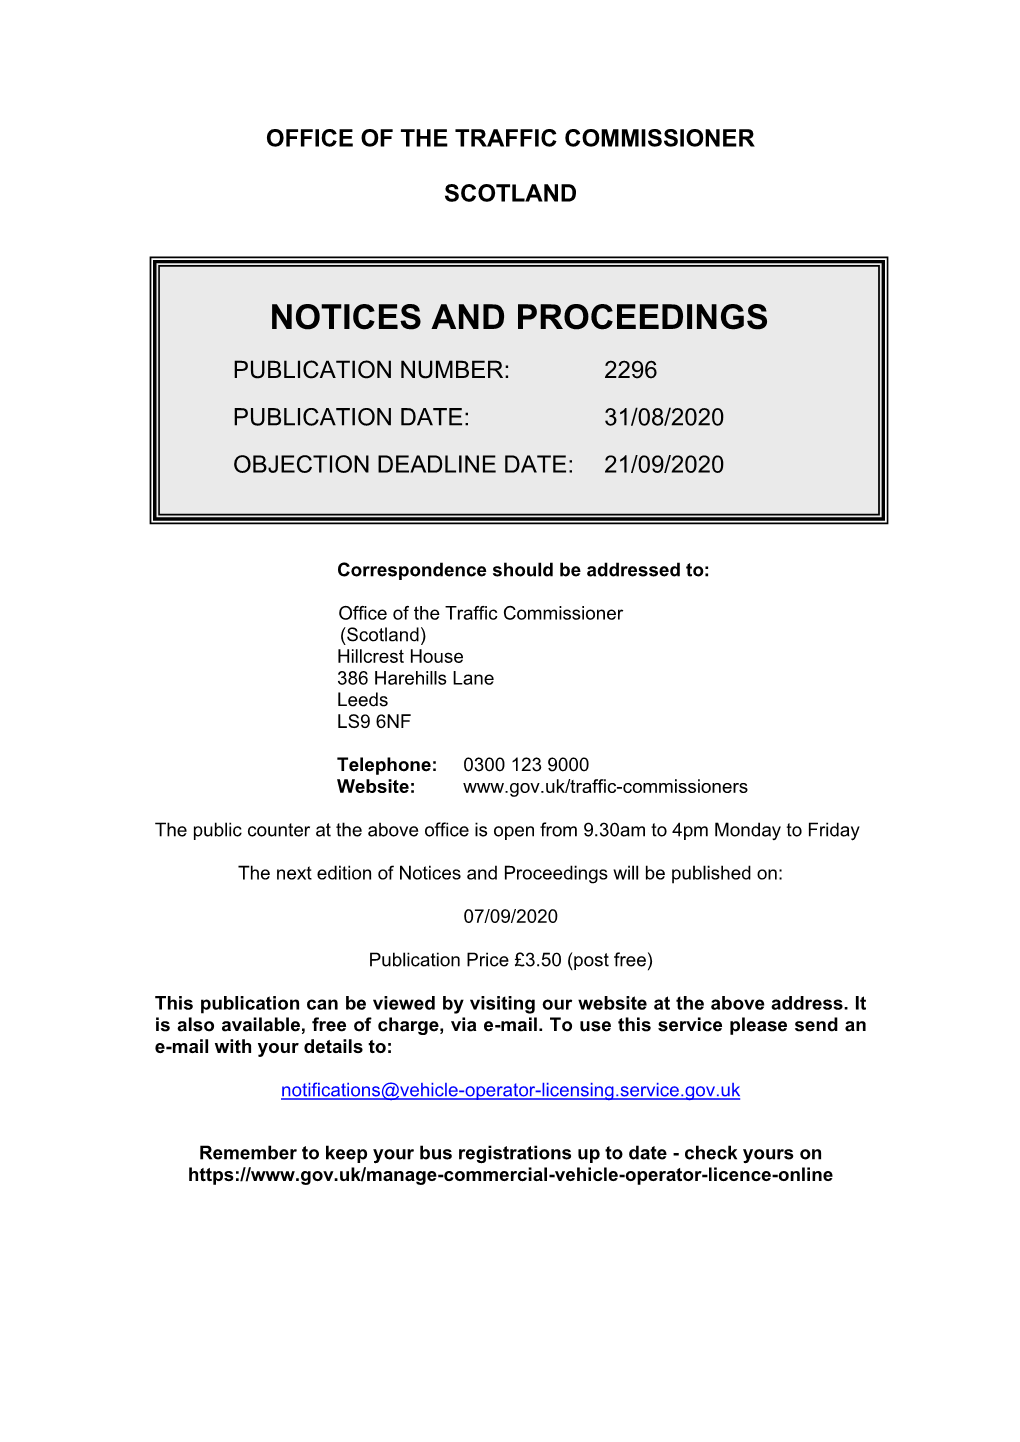 Notices and Proceedings for Scotland